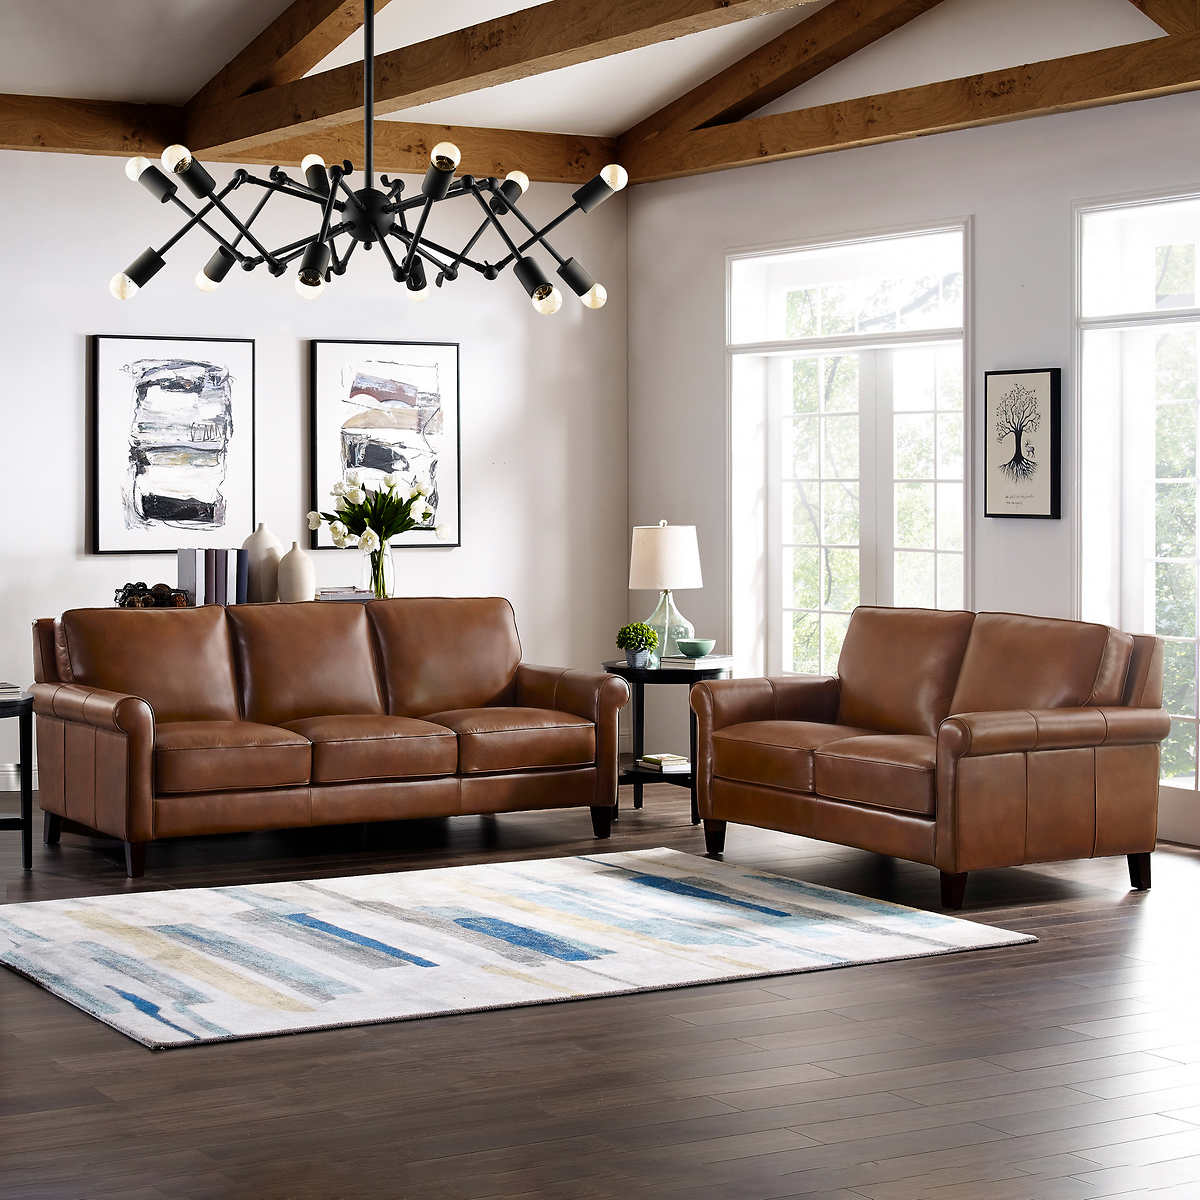 Ln 2 Piece Top Grain Leather Set, Brown Leather Sofa And Loveseat Sets